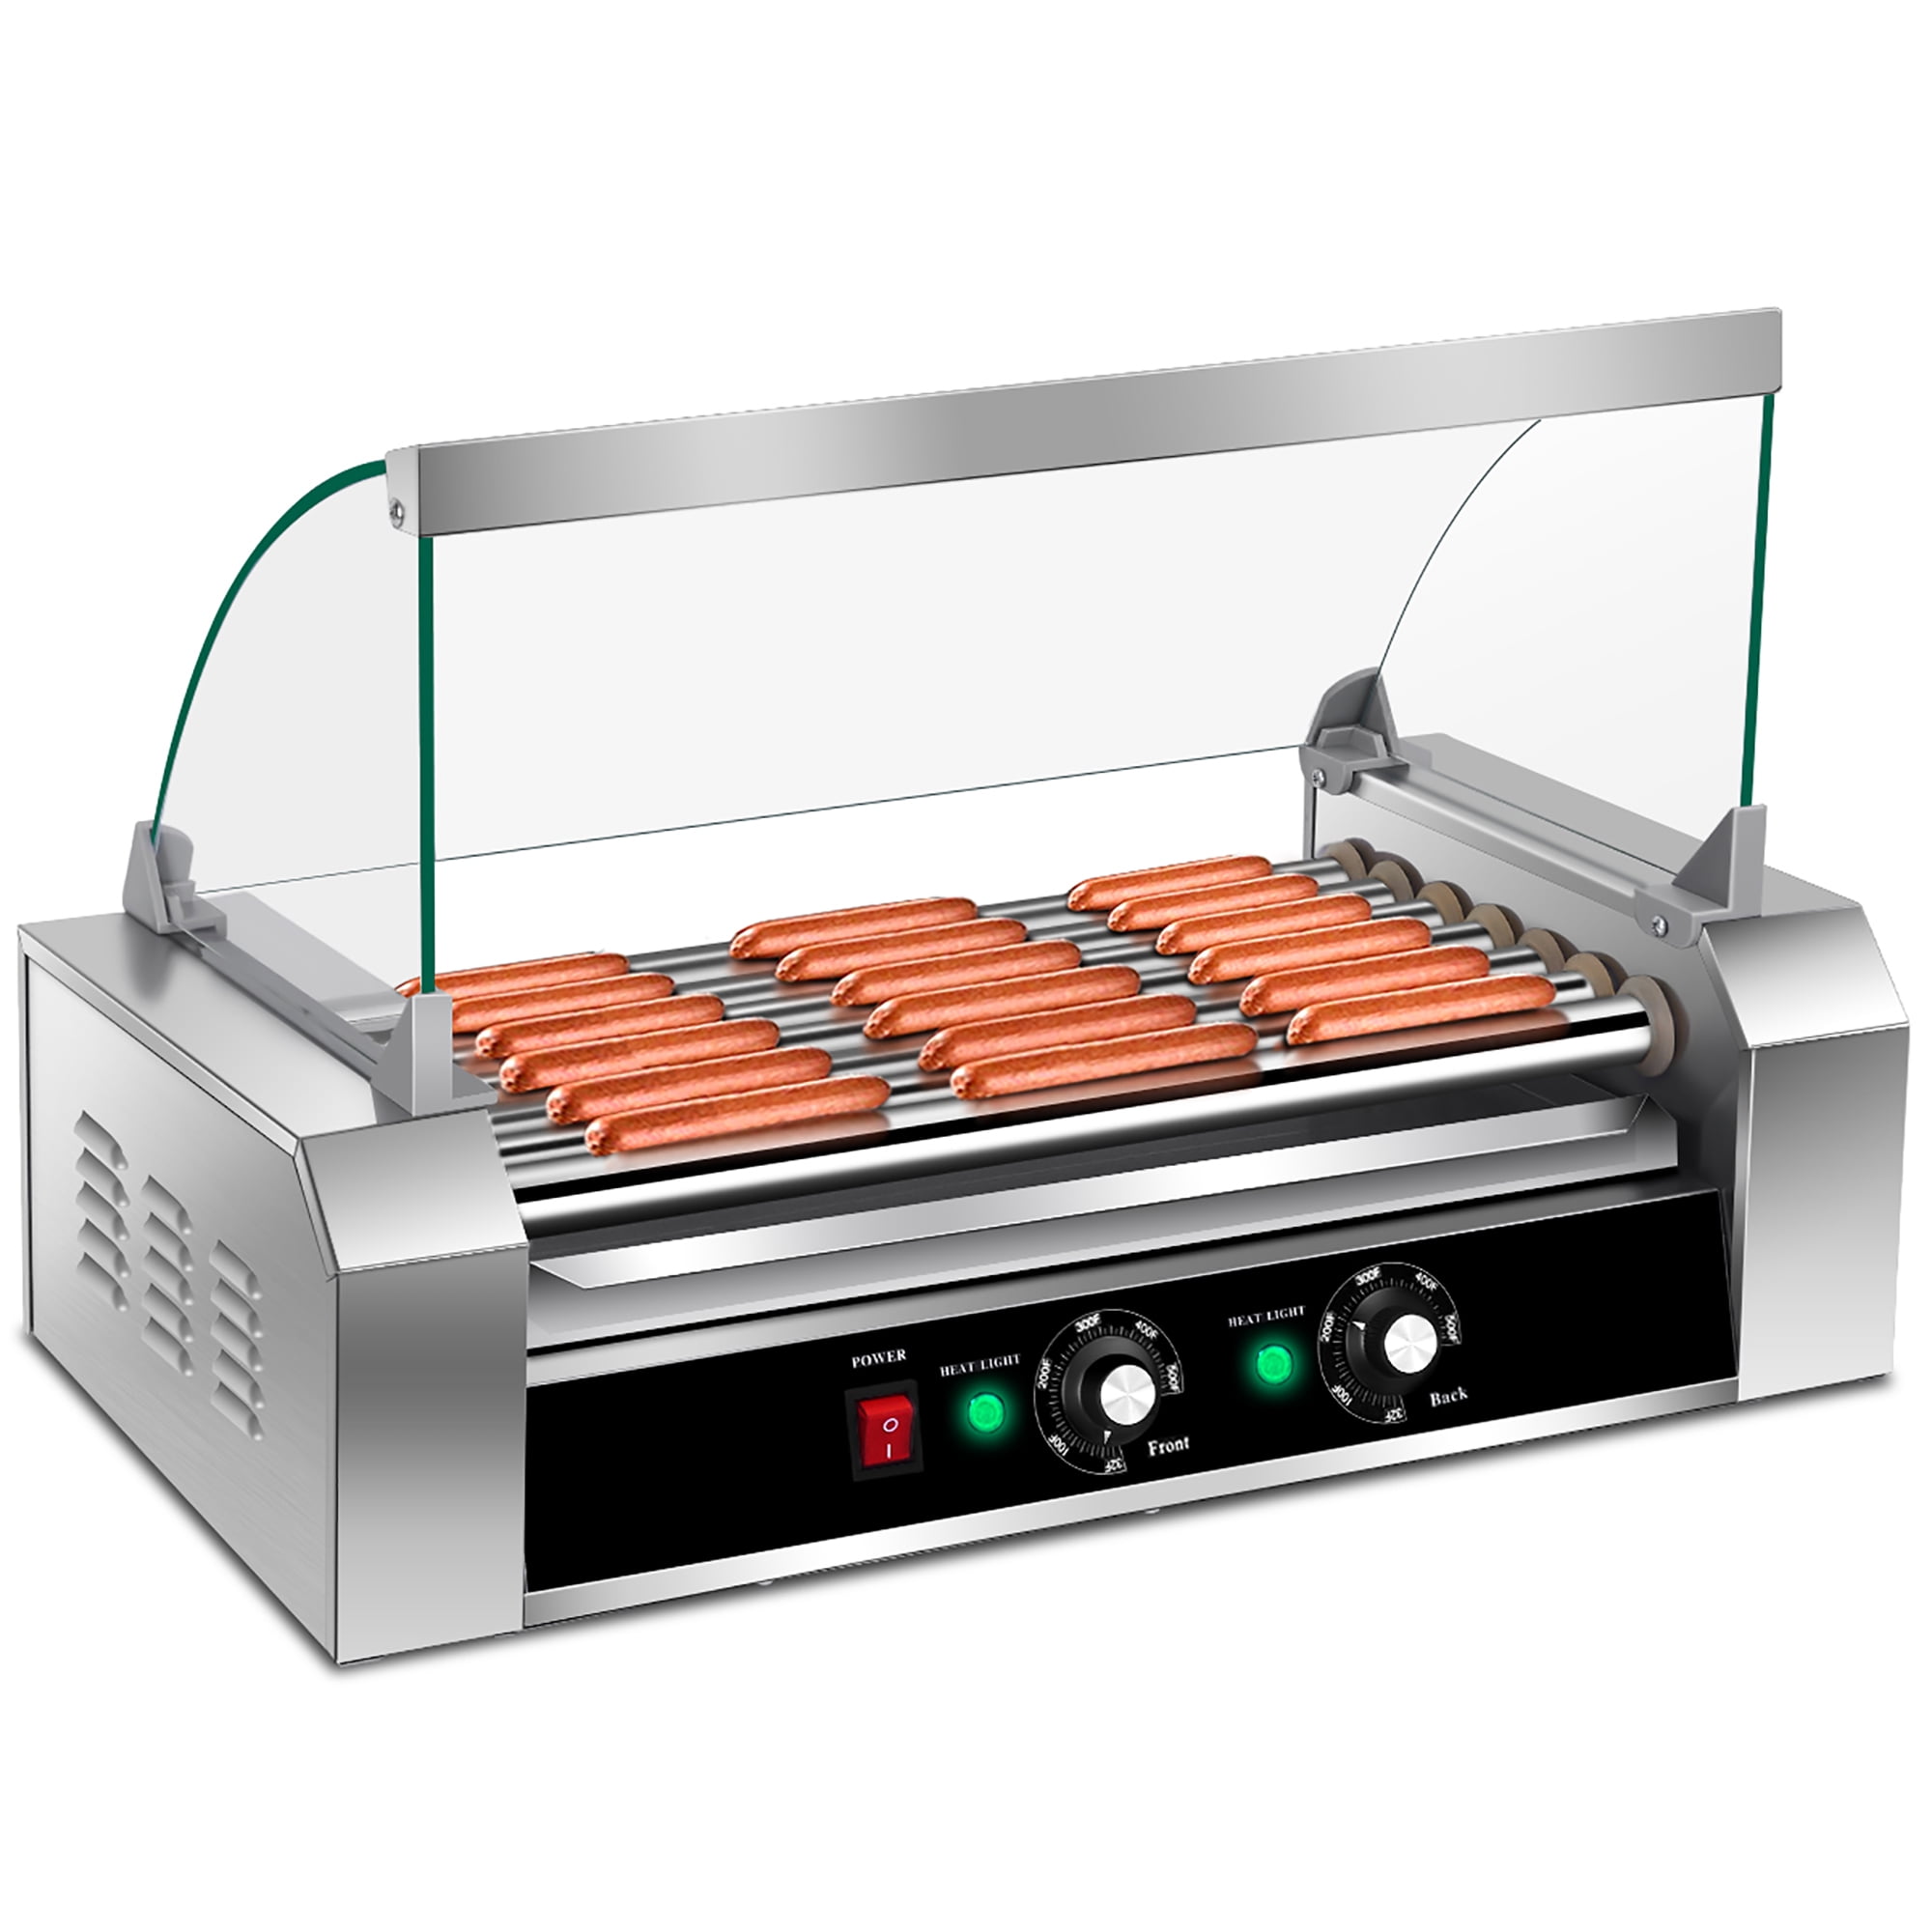 HOT DOG ROLLER GRILL COOKER 30 HOTDOGS HOT DOG STAND 